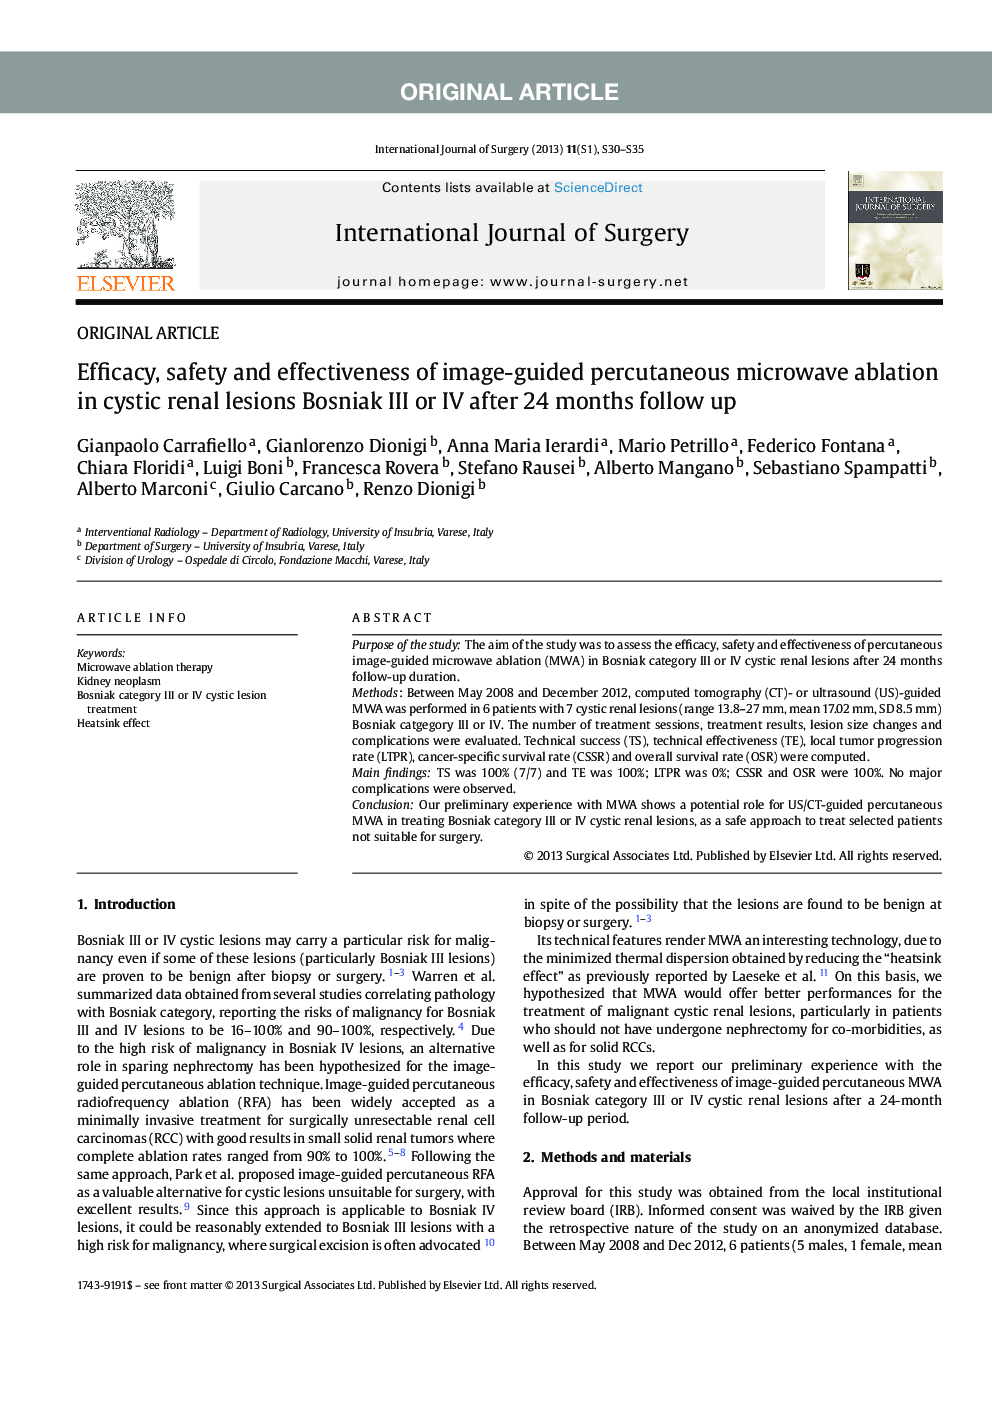 Efficacy, safety and effectiveness of image-guided percutaneous microwave ablation in cystic renal lesions Bosniak III or IV after 24 months follow up